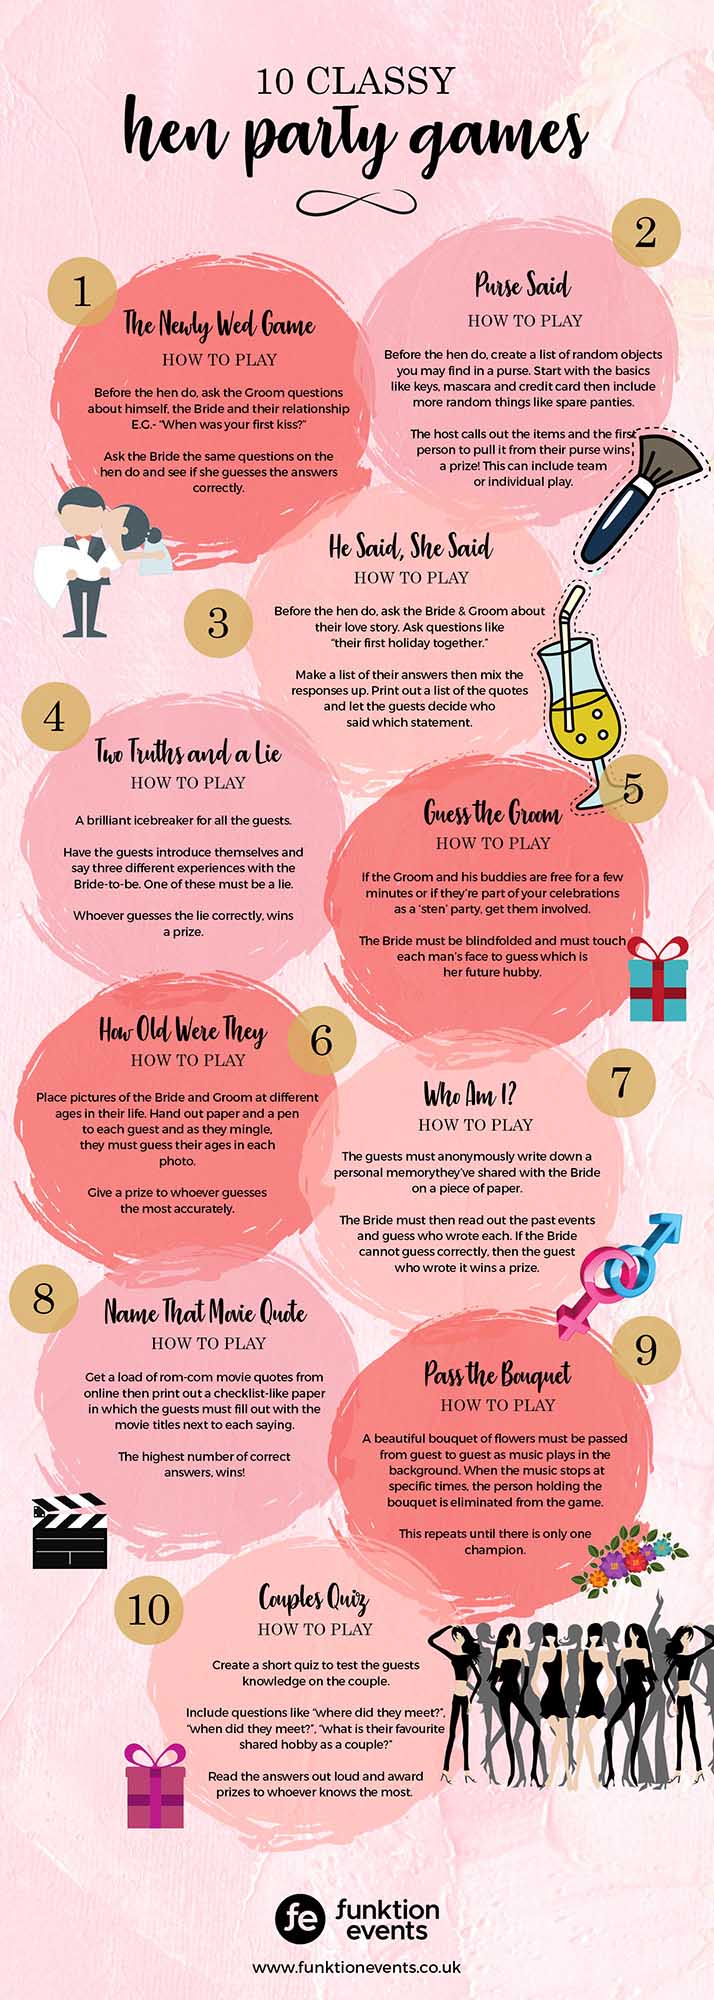 Bachelorette's Cup - Free Digital Download – Stag & Hen